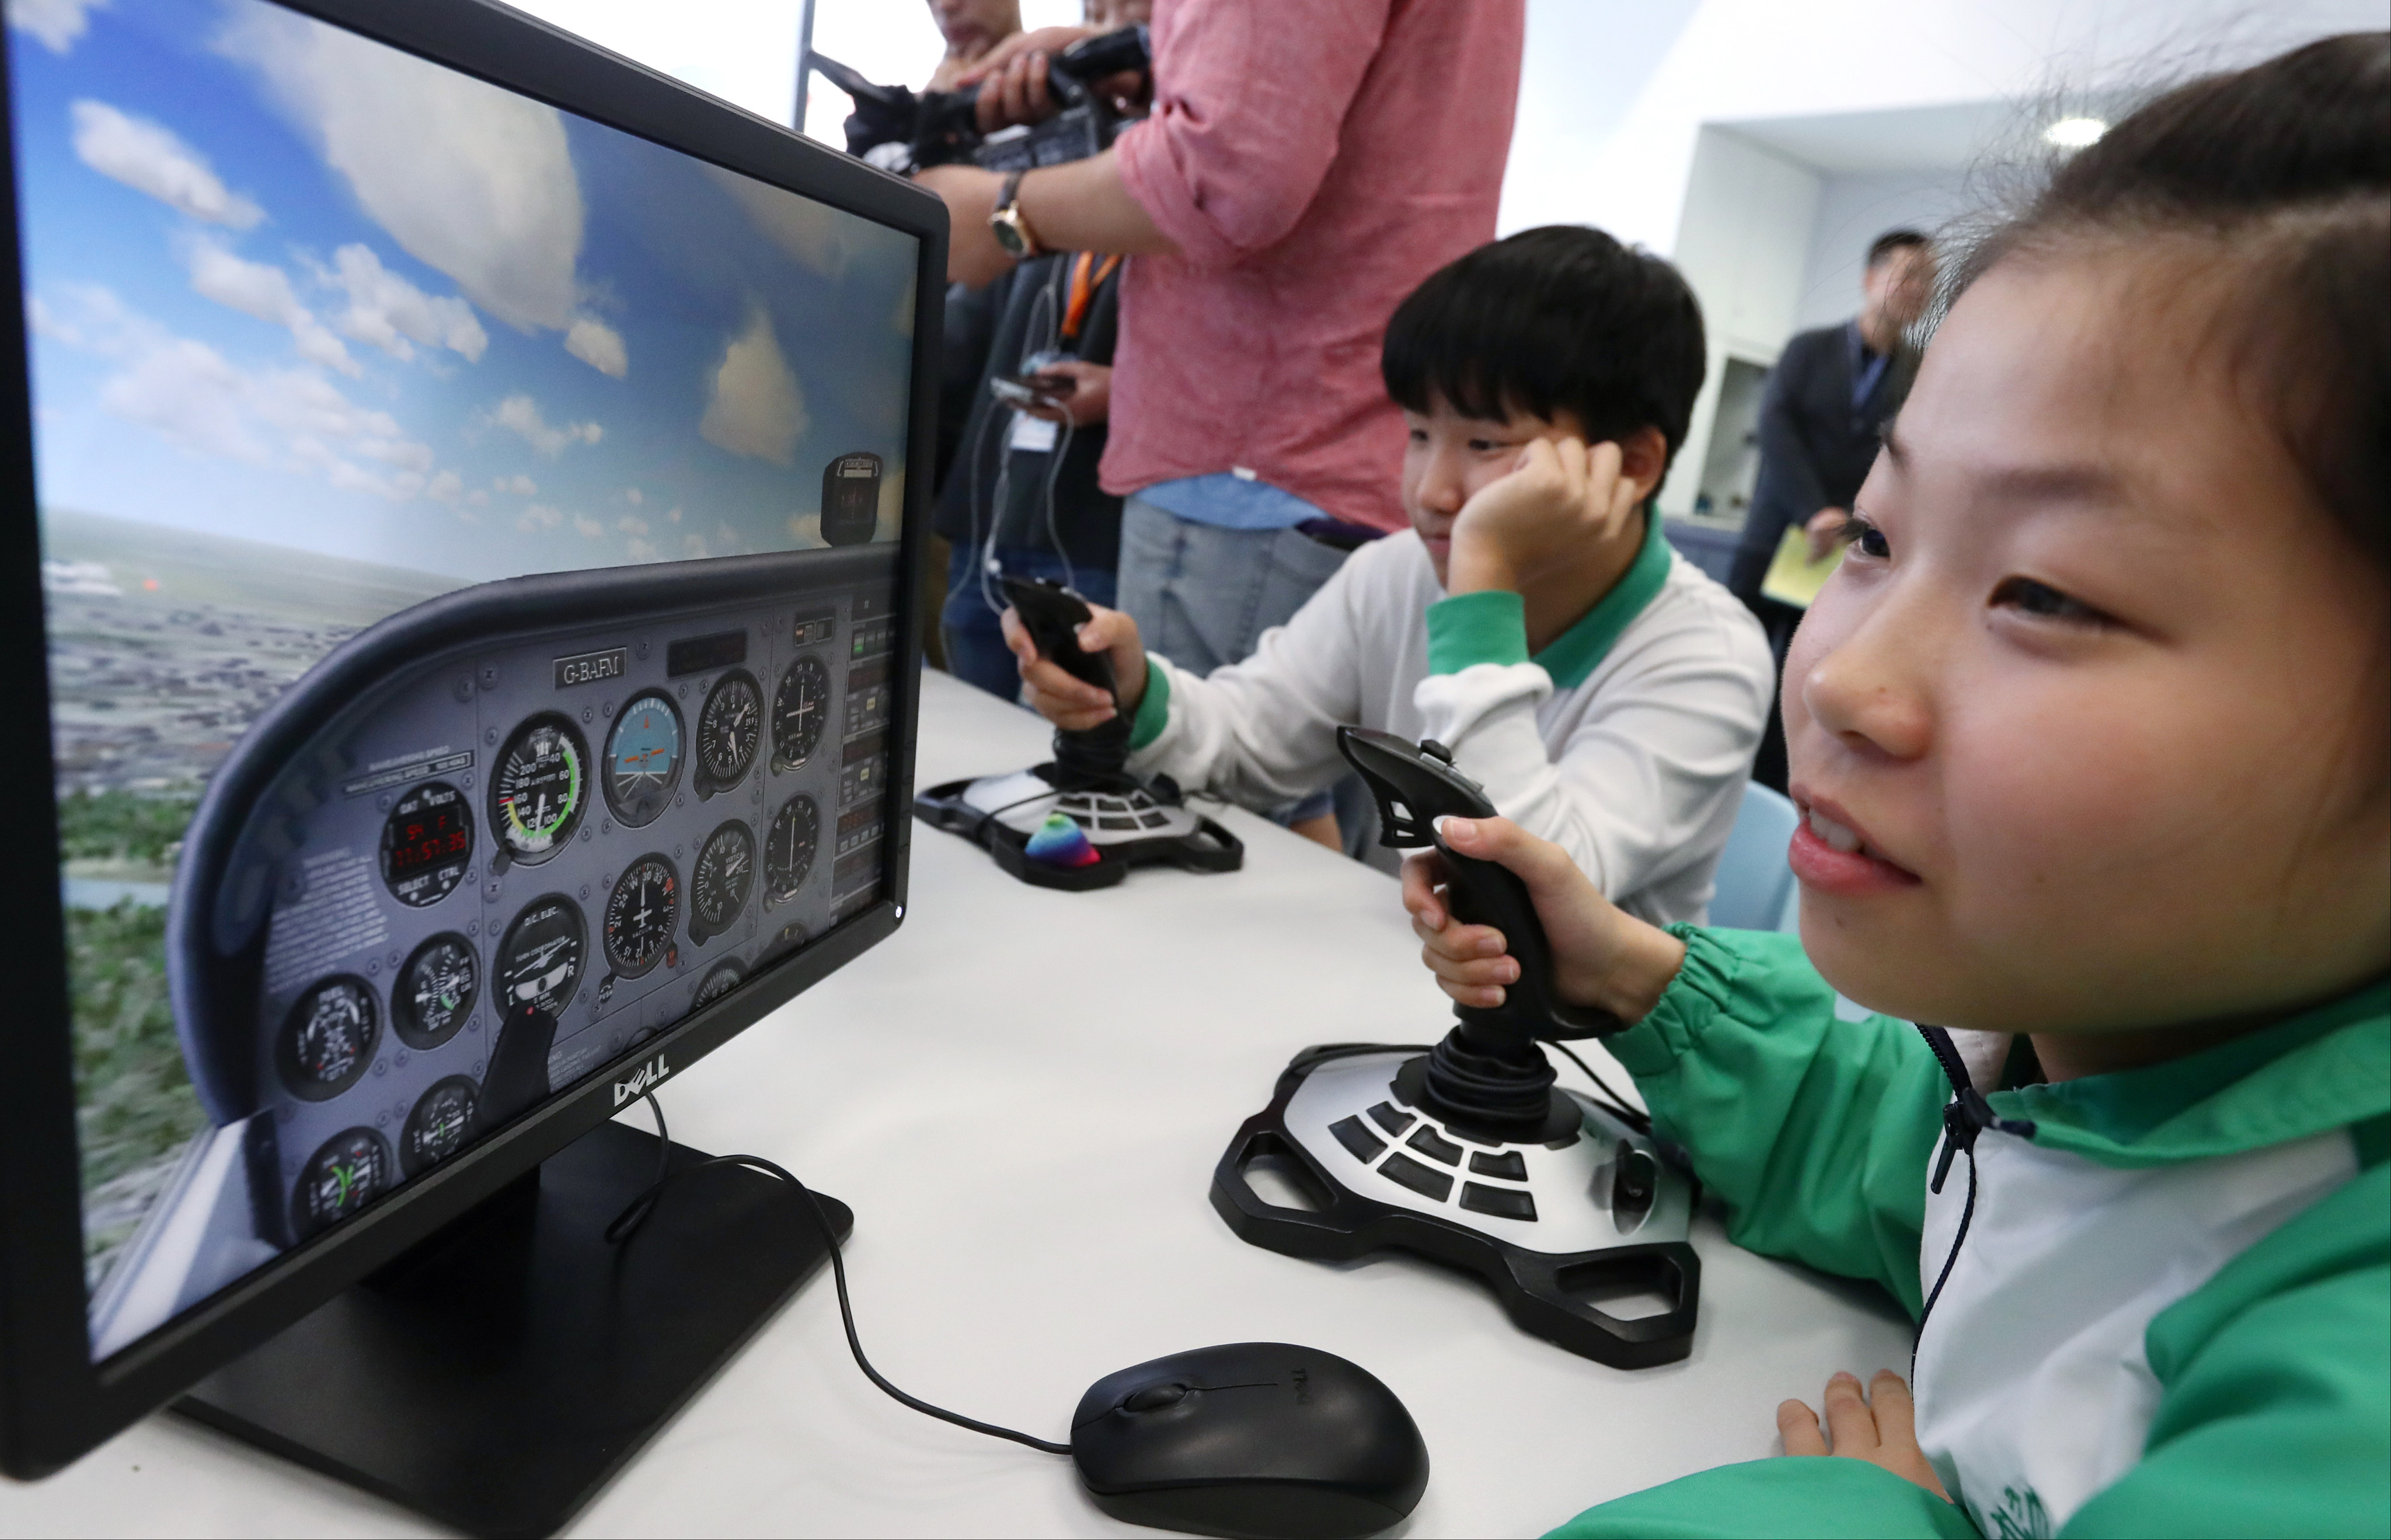 Students at SKH Holy Cross Primary School in Kowloon City take part in a flight simulation class organised by the Education Bureau in 2018. Science will take on greater importance in Hong Kong’s primary schools after the current general studies course is split into separate science and humanities classes. Photo: Nora Tam